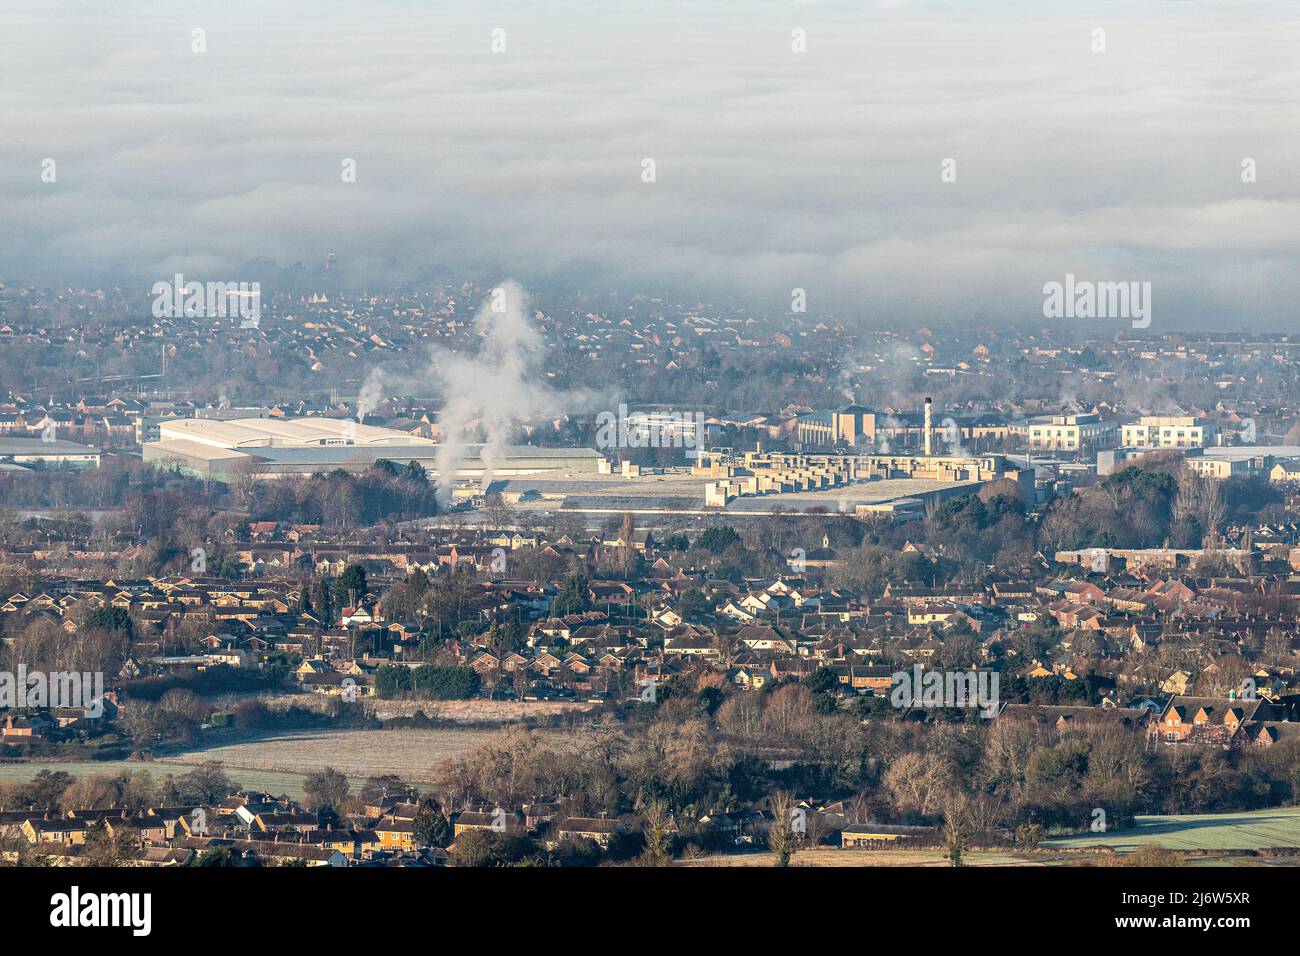 A temperature inversion causing fog to obscure the city of Gloucester, England UK. Gloucester Business Park at Brockworth is in the foreground. Stock Photo